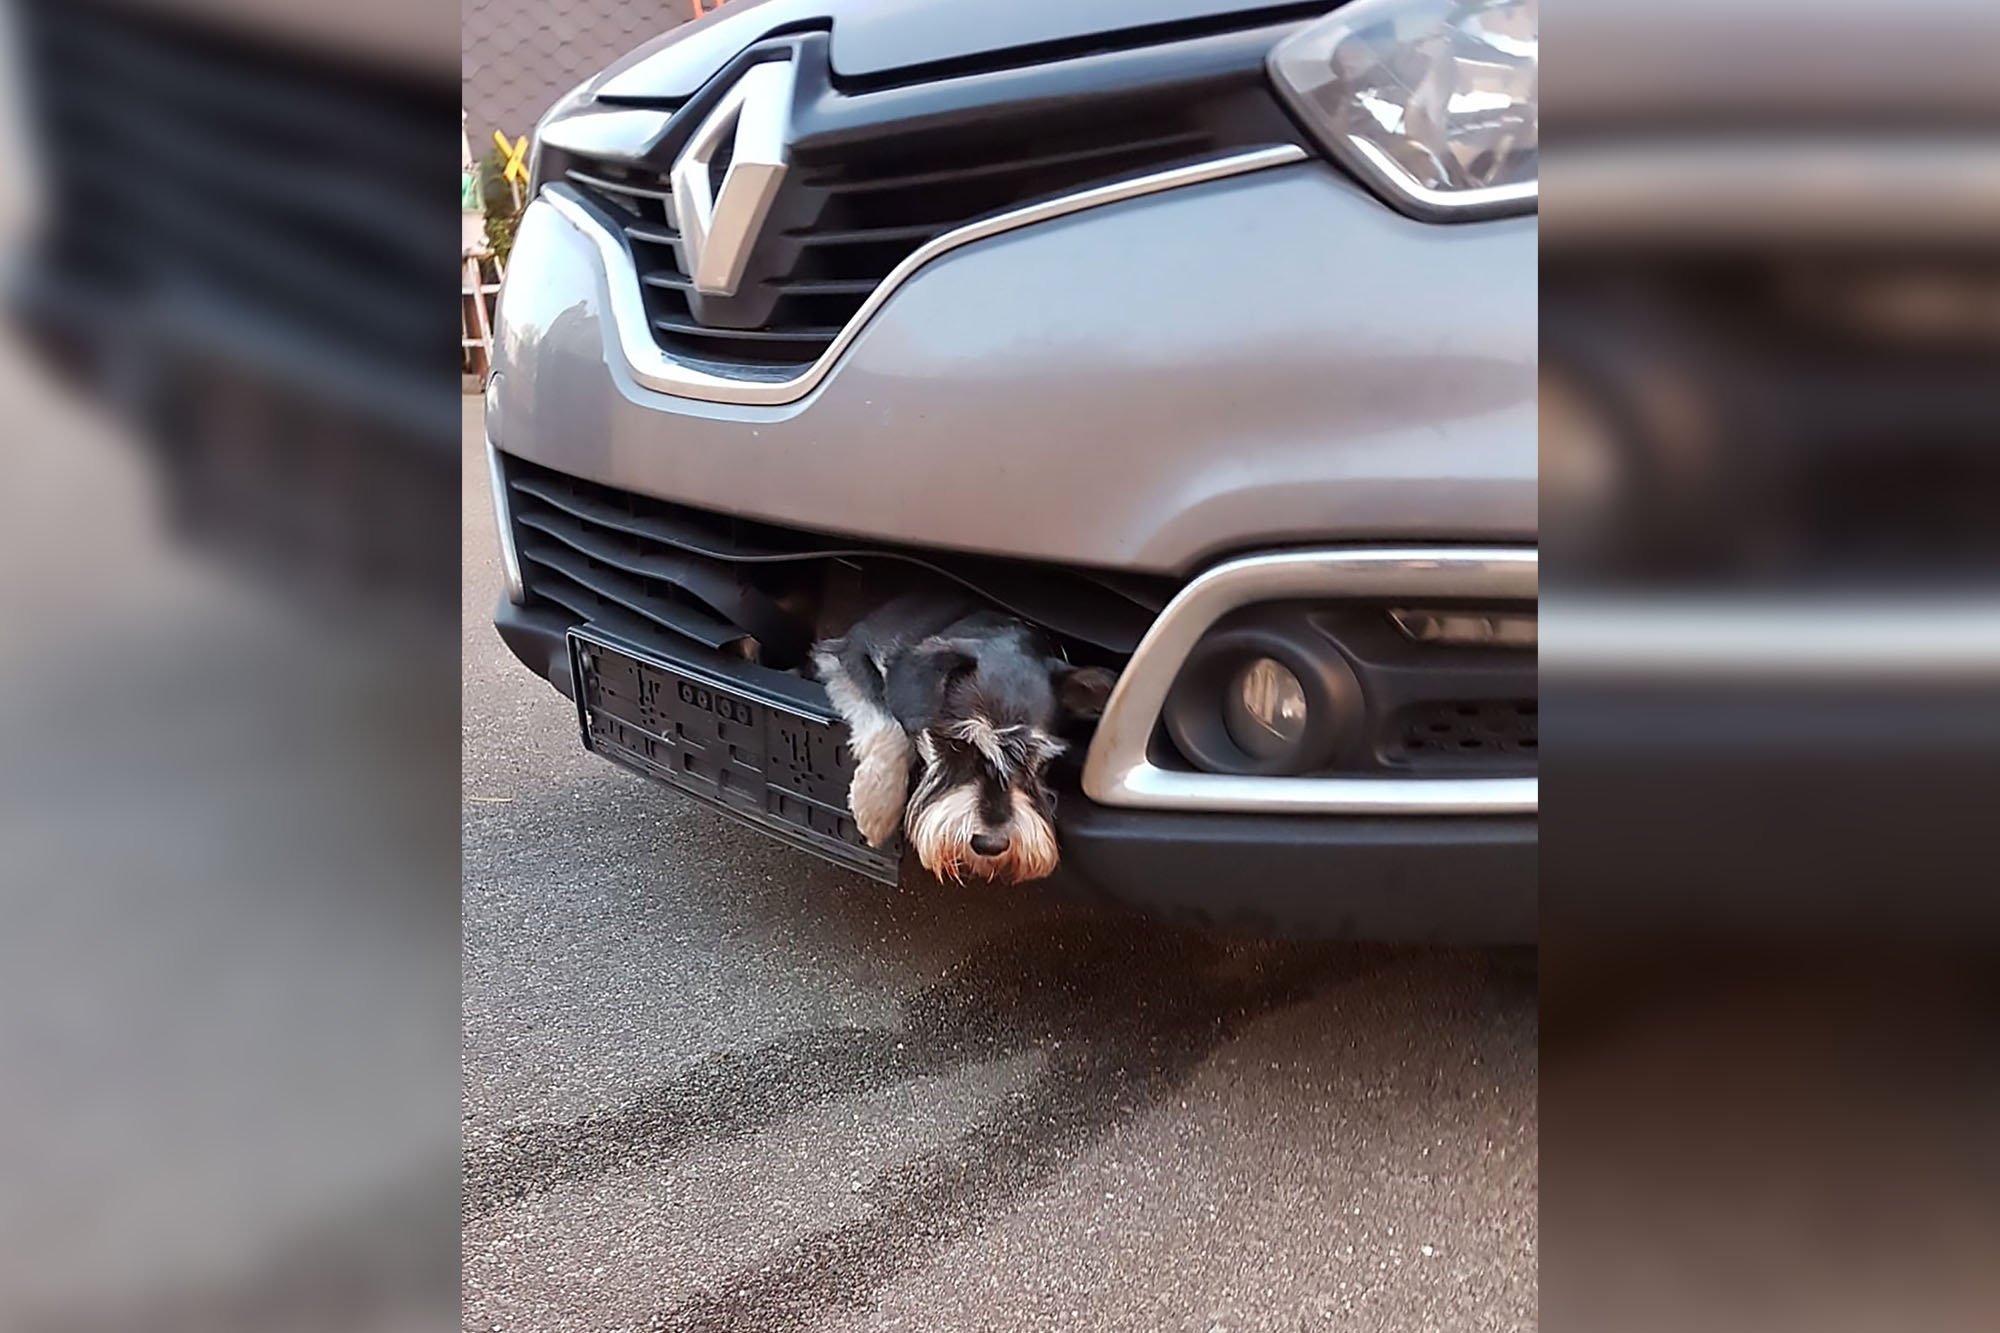 Dog survives after getting stuck in grille of car